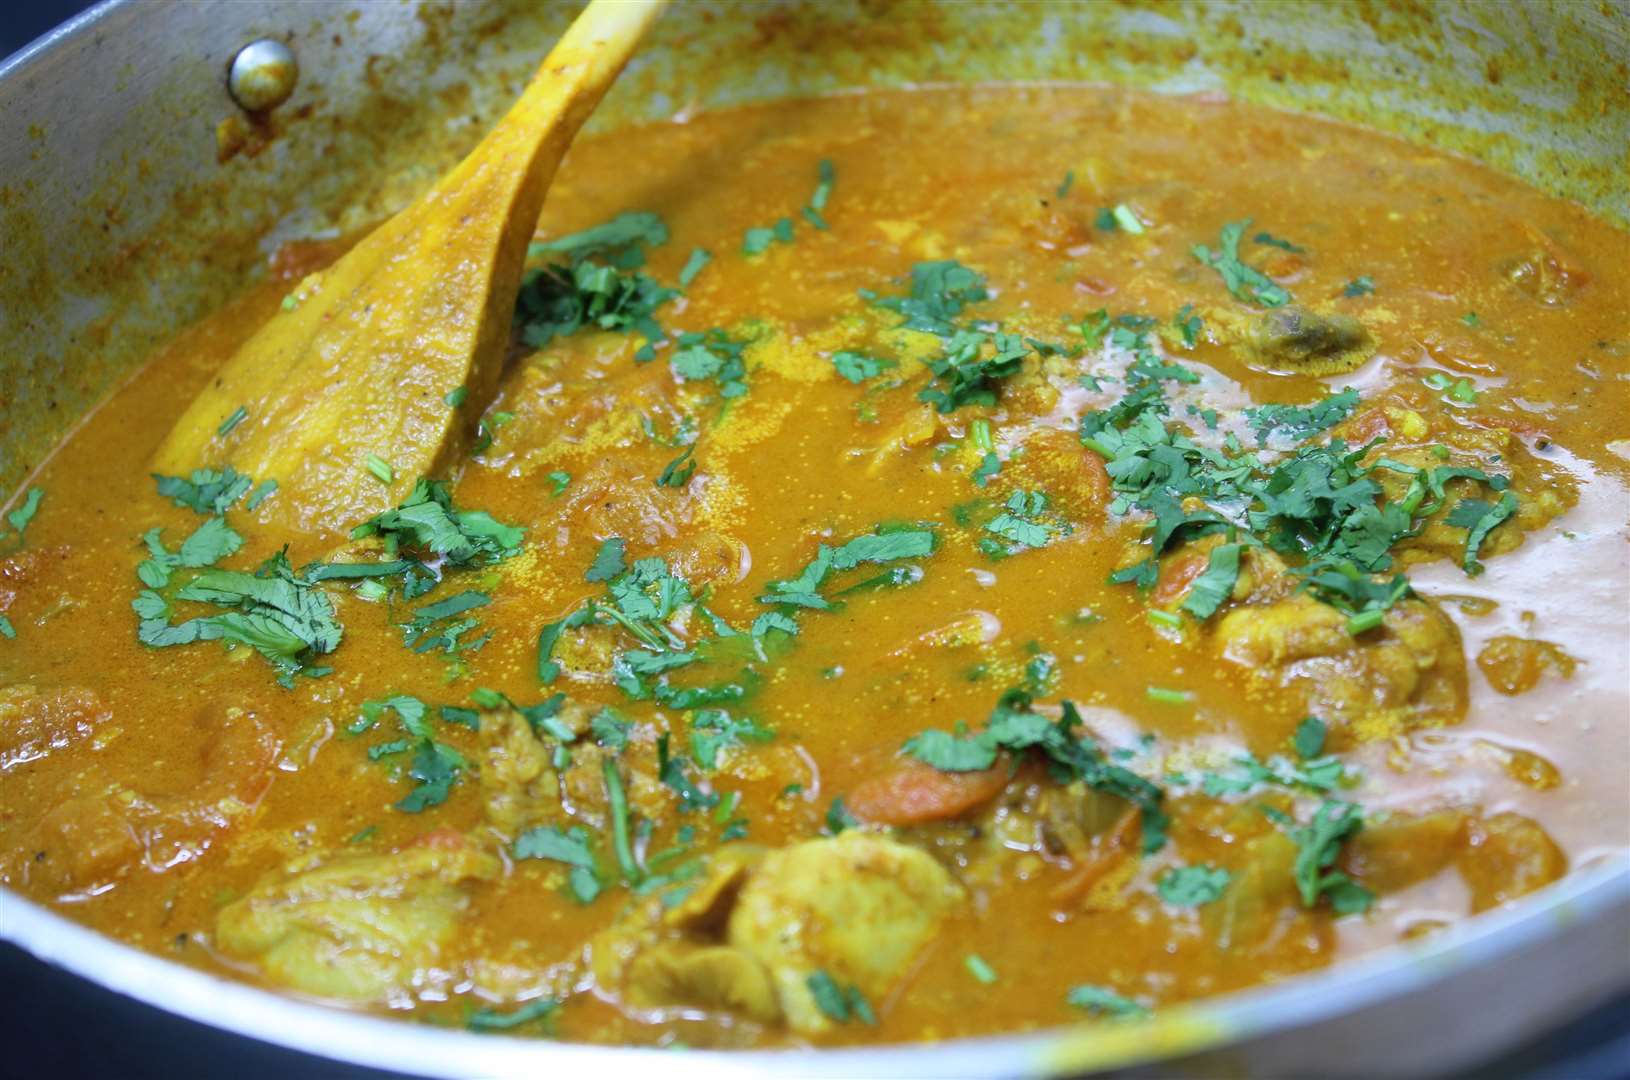 The prison officers' curry was reportedly spiked. Picture: iStock